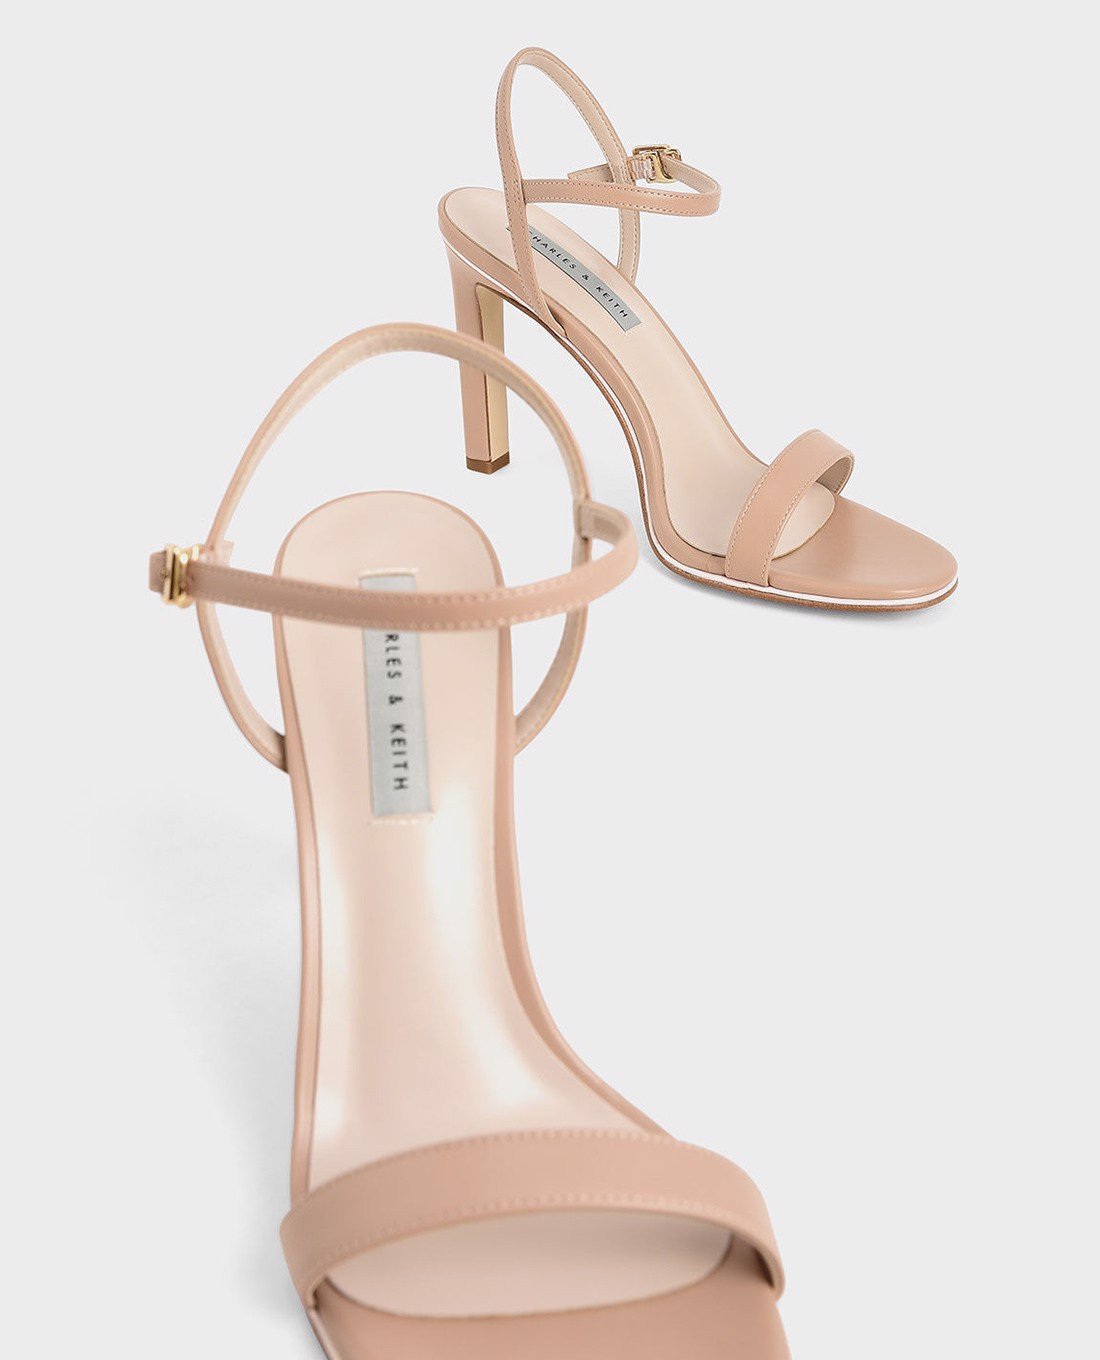 CHARLES & KEITH – SPRING SUMMER COLLECTION 2022